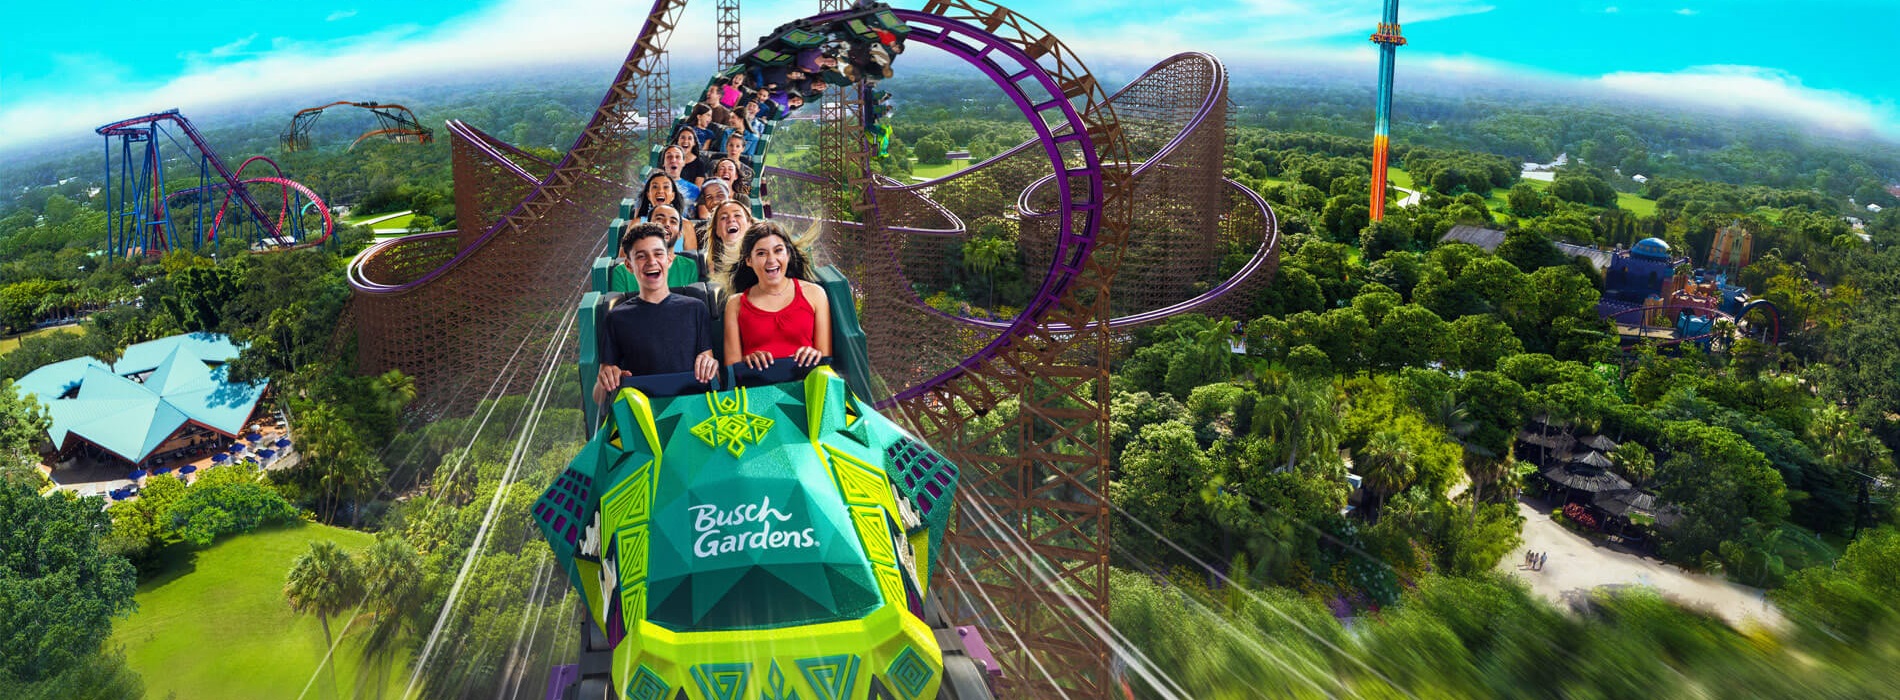 Many people are enjoying Dive coaster ride in the Busch Garden, one of the brands of SeaWorld Entertainment Inc